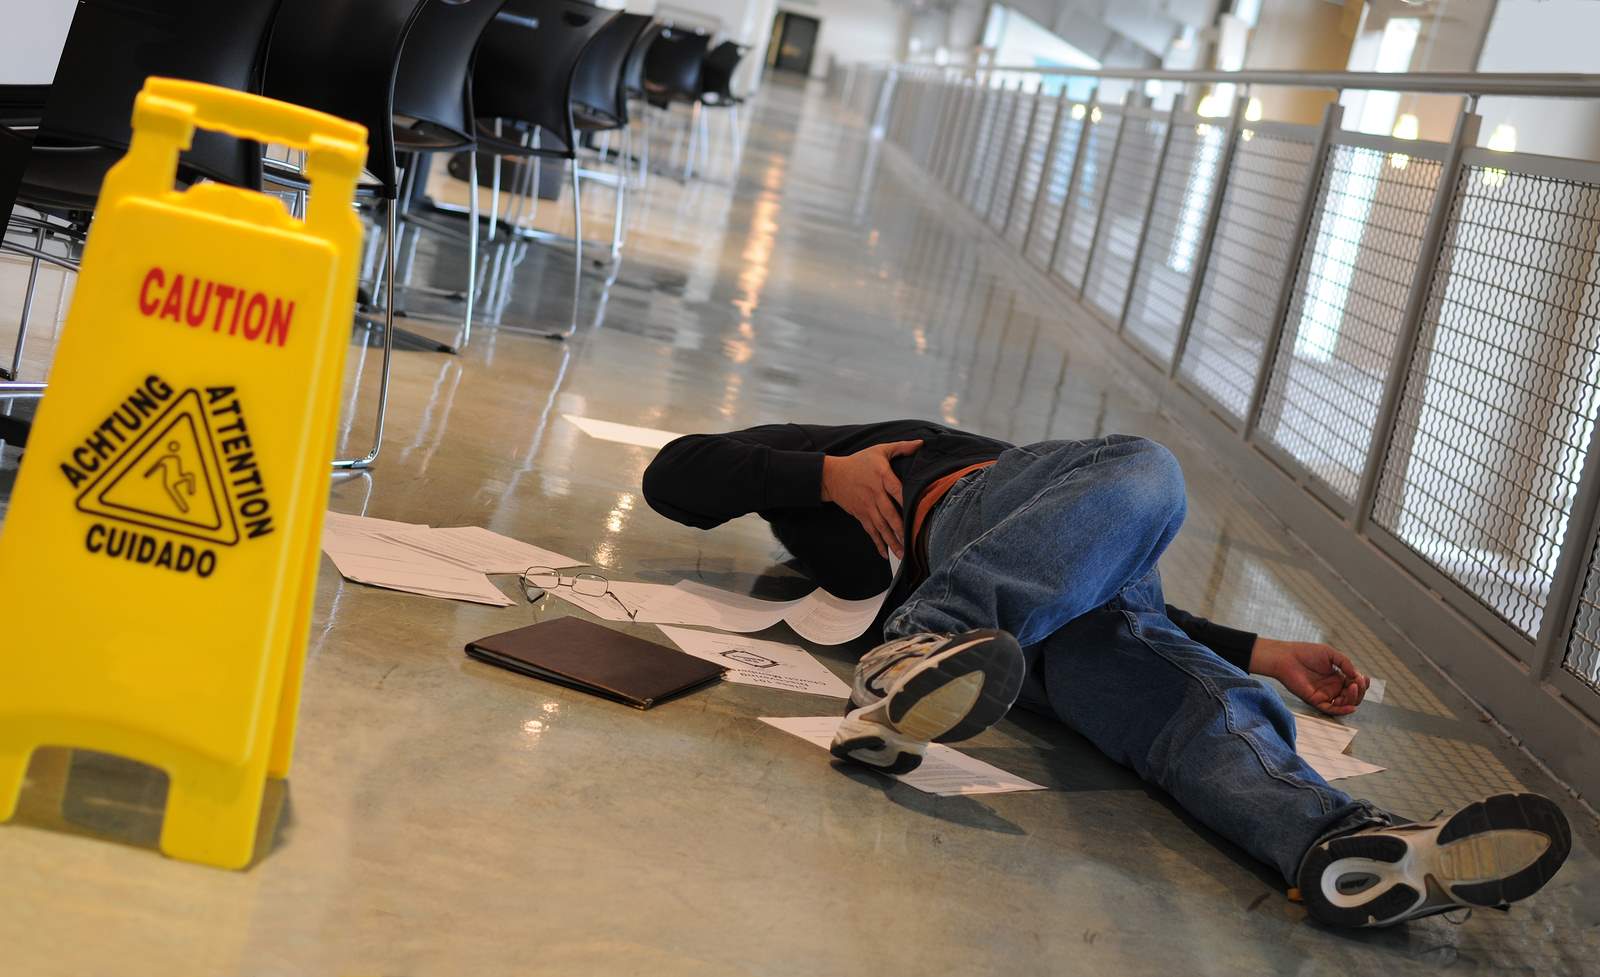 Three Ways Negligence Can Result in a Serious Slip and Fall Accident